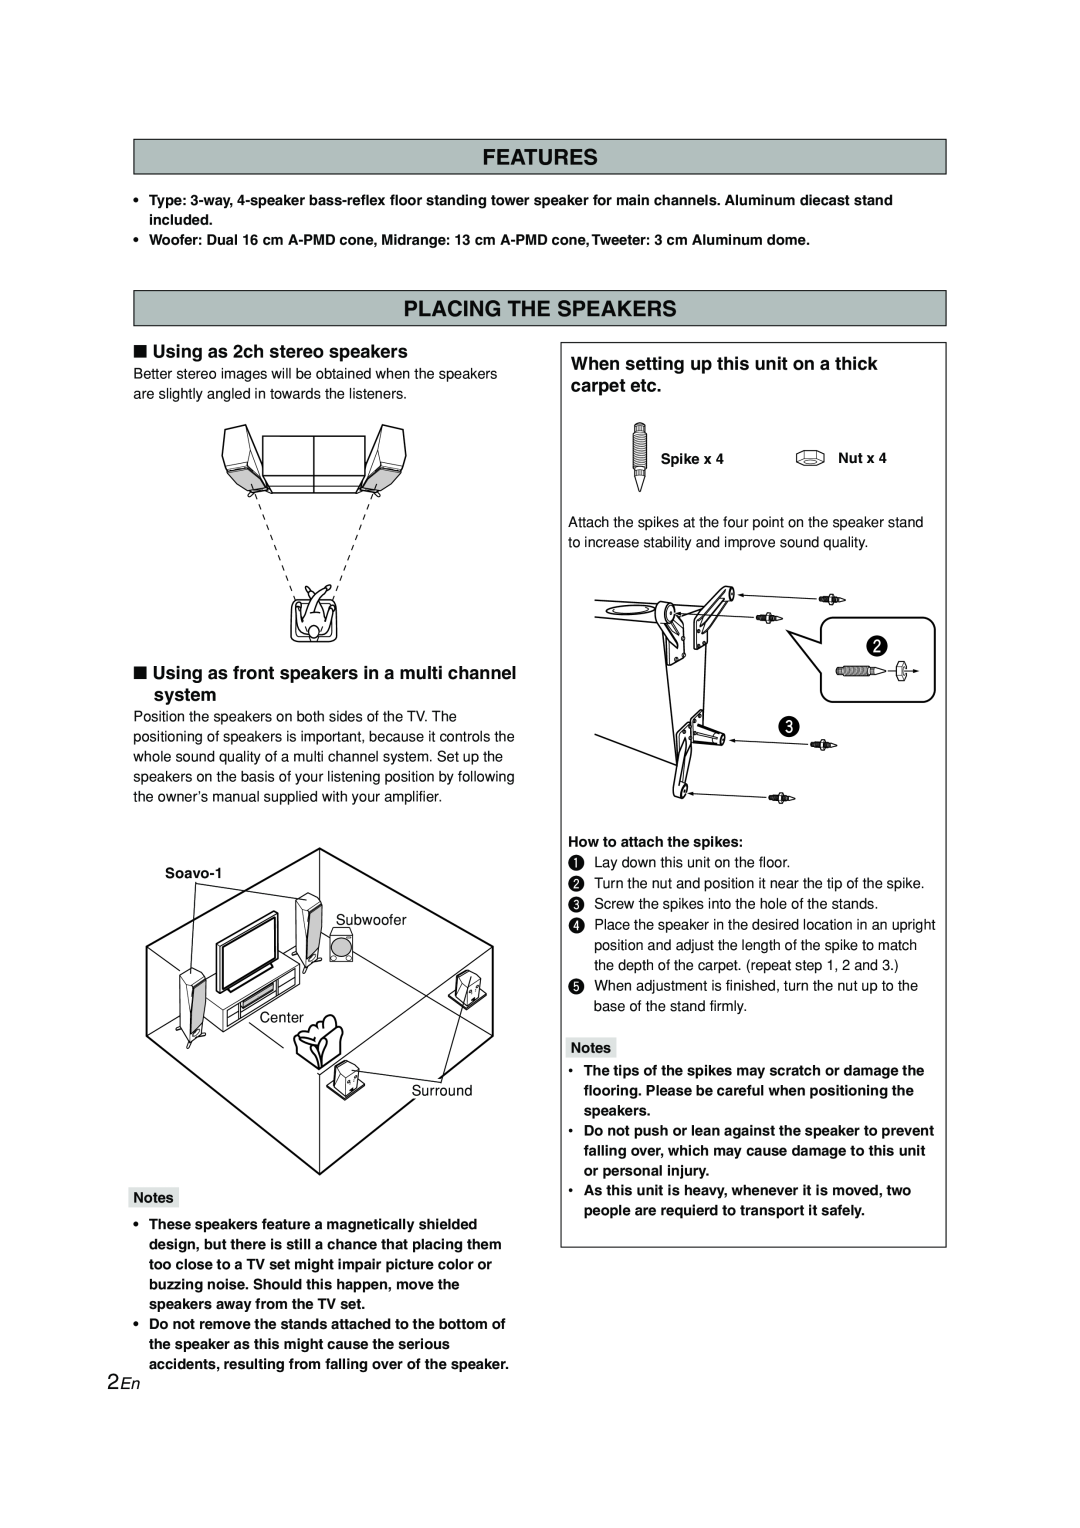 Yamaha Soavo-1 owner manual Features, Placing The Speakers, Using as 2ch stereo speakers 